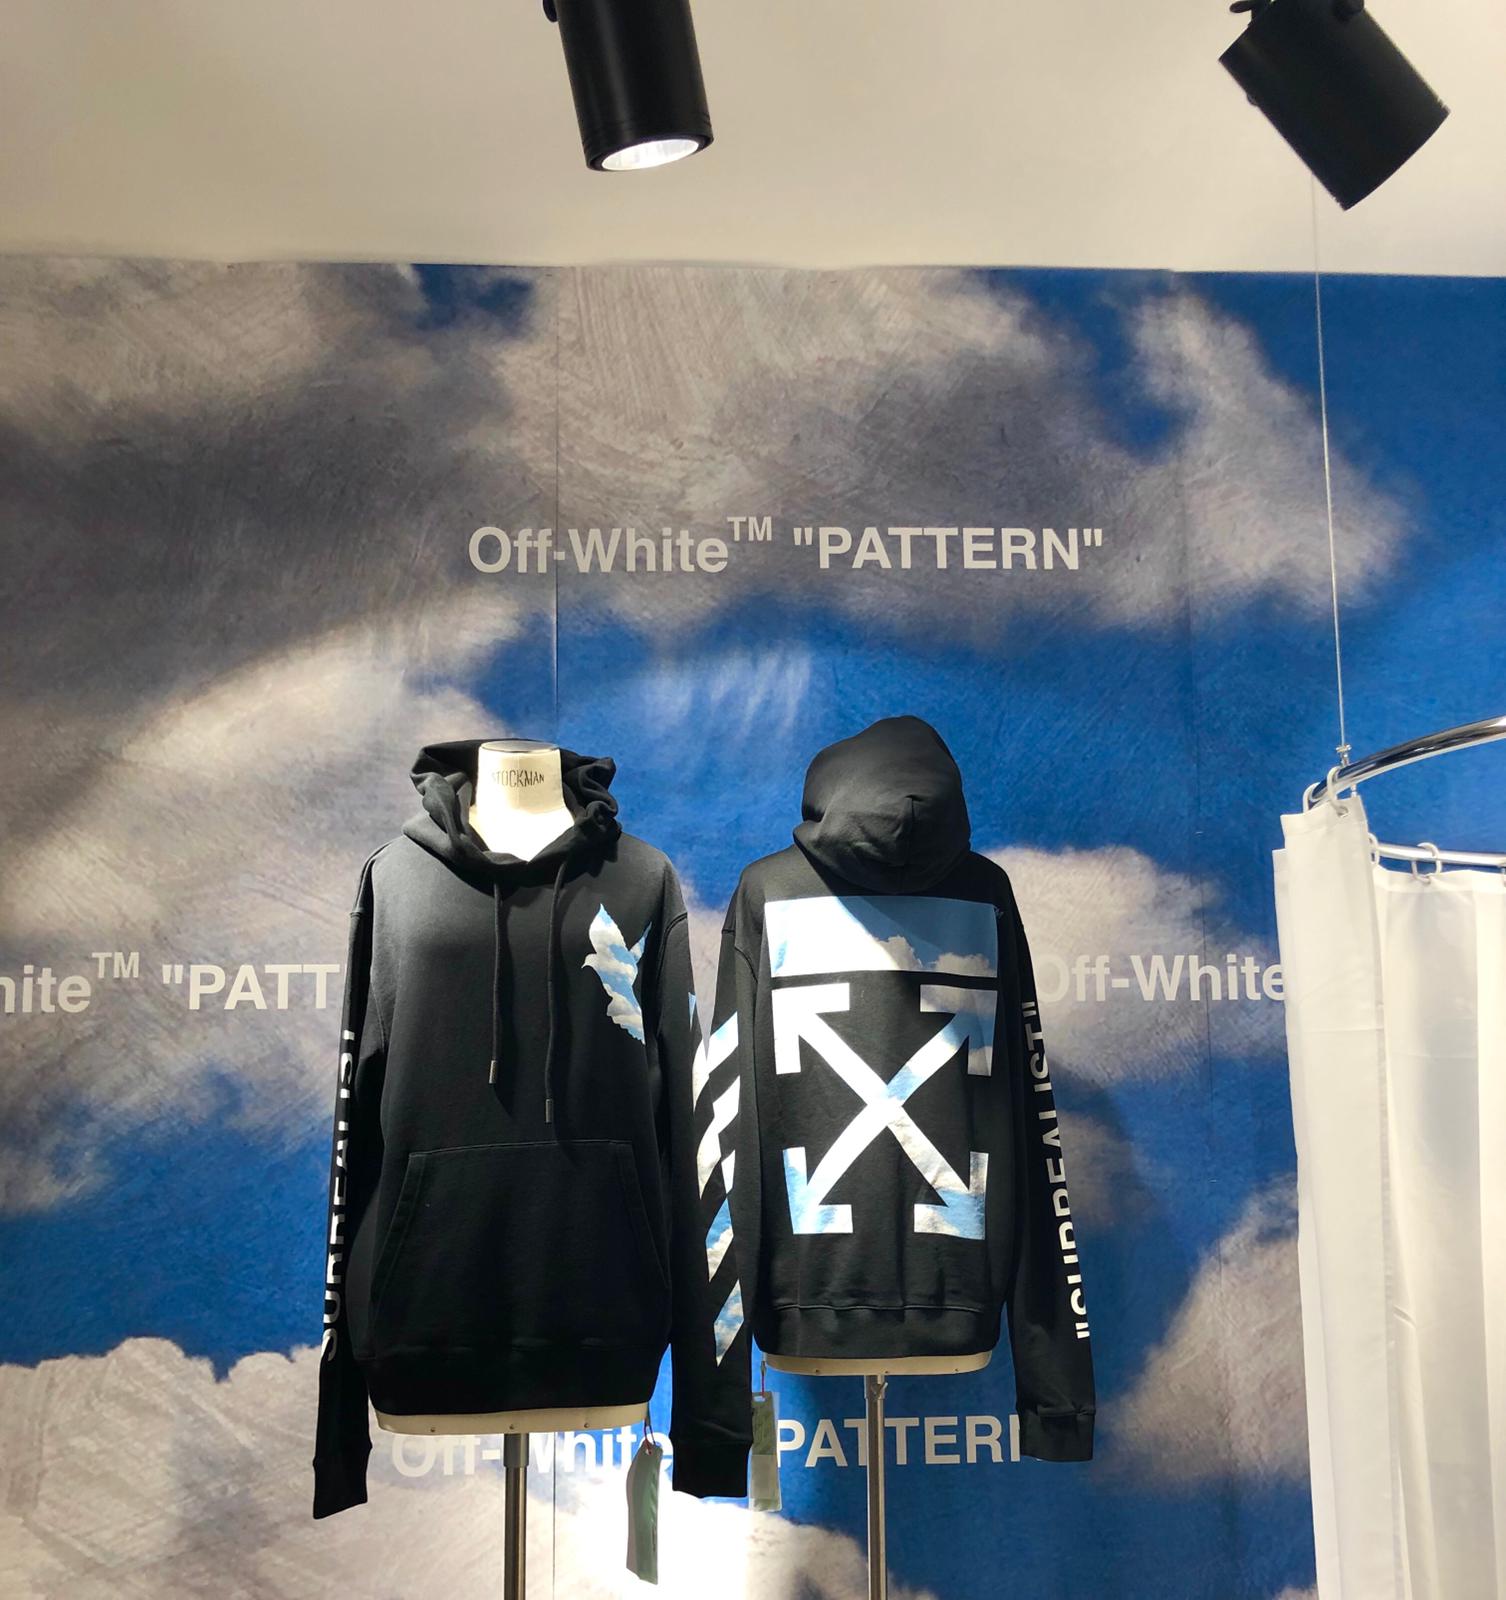 Off-White x Stüssy Collaboration Teased By Virgil Abloh